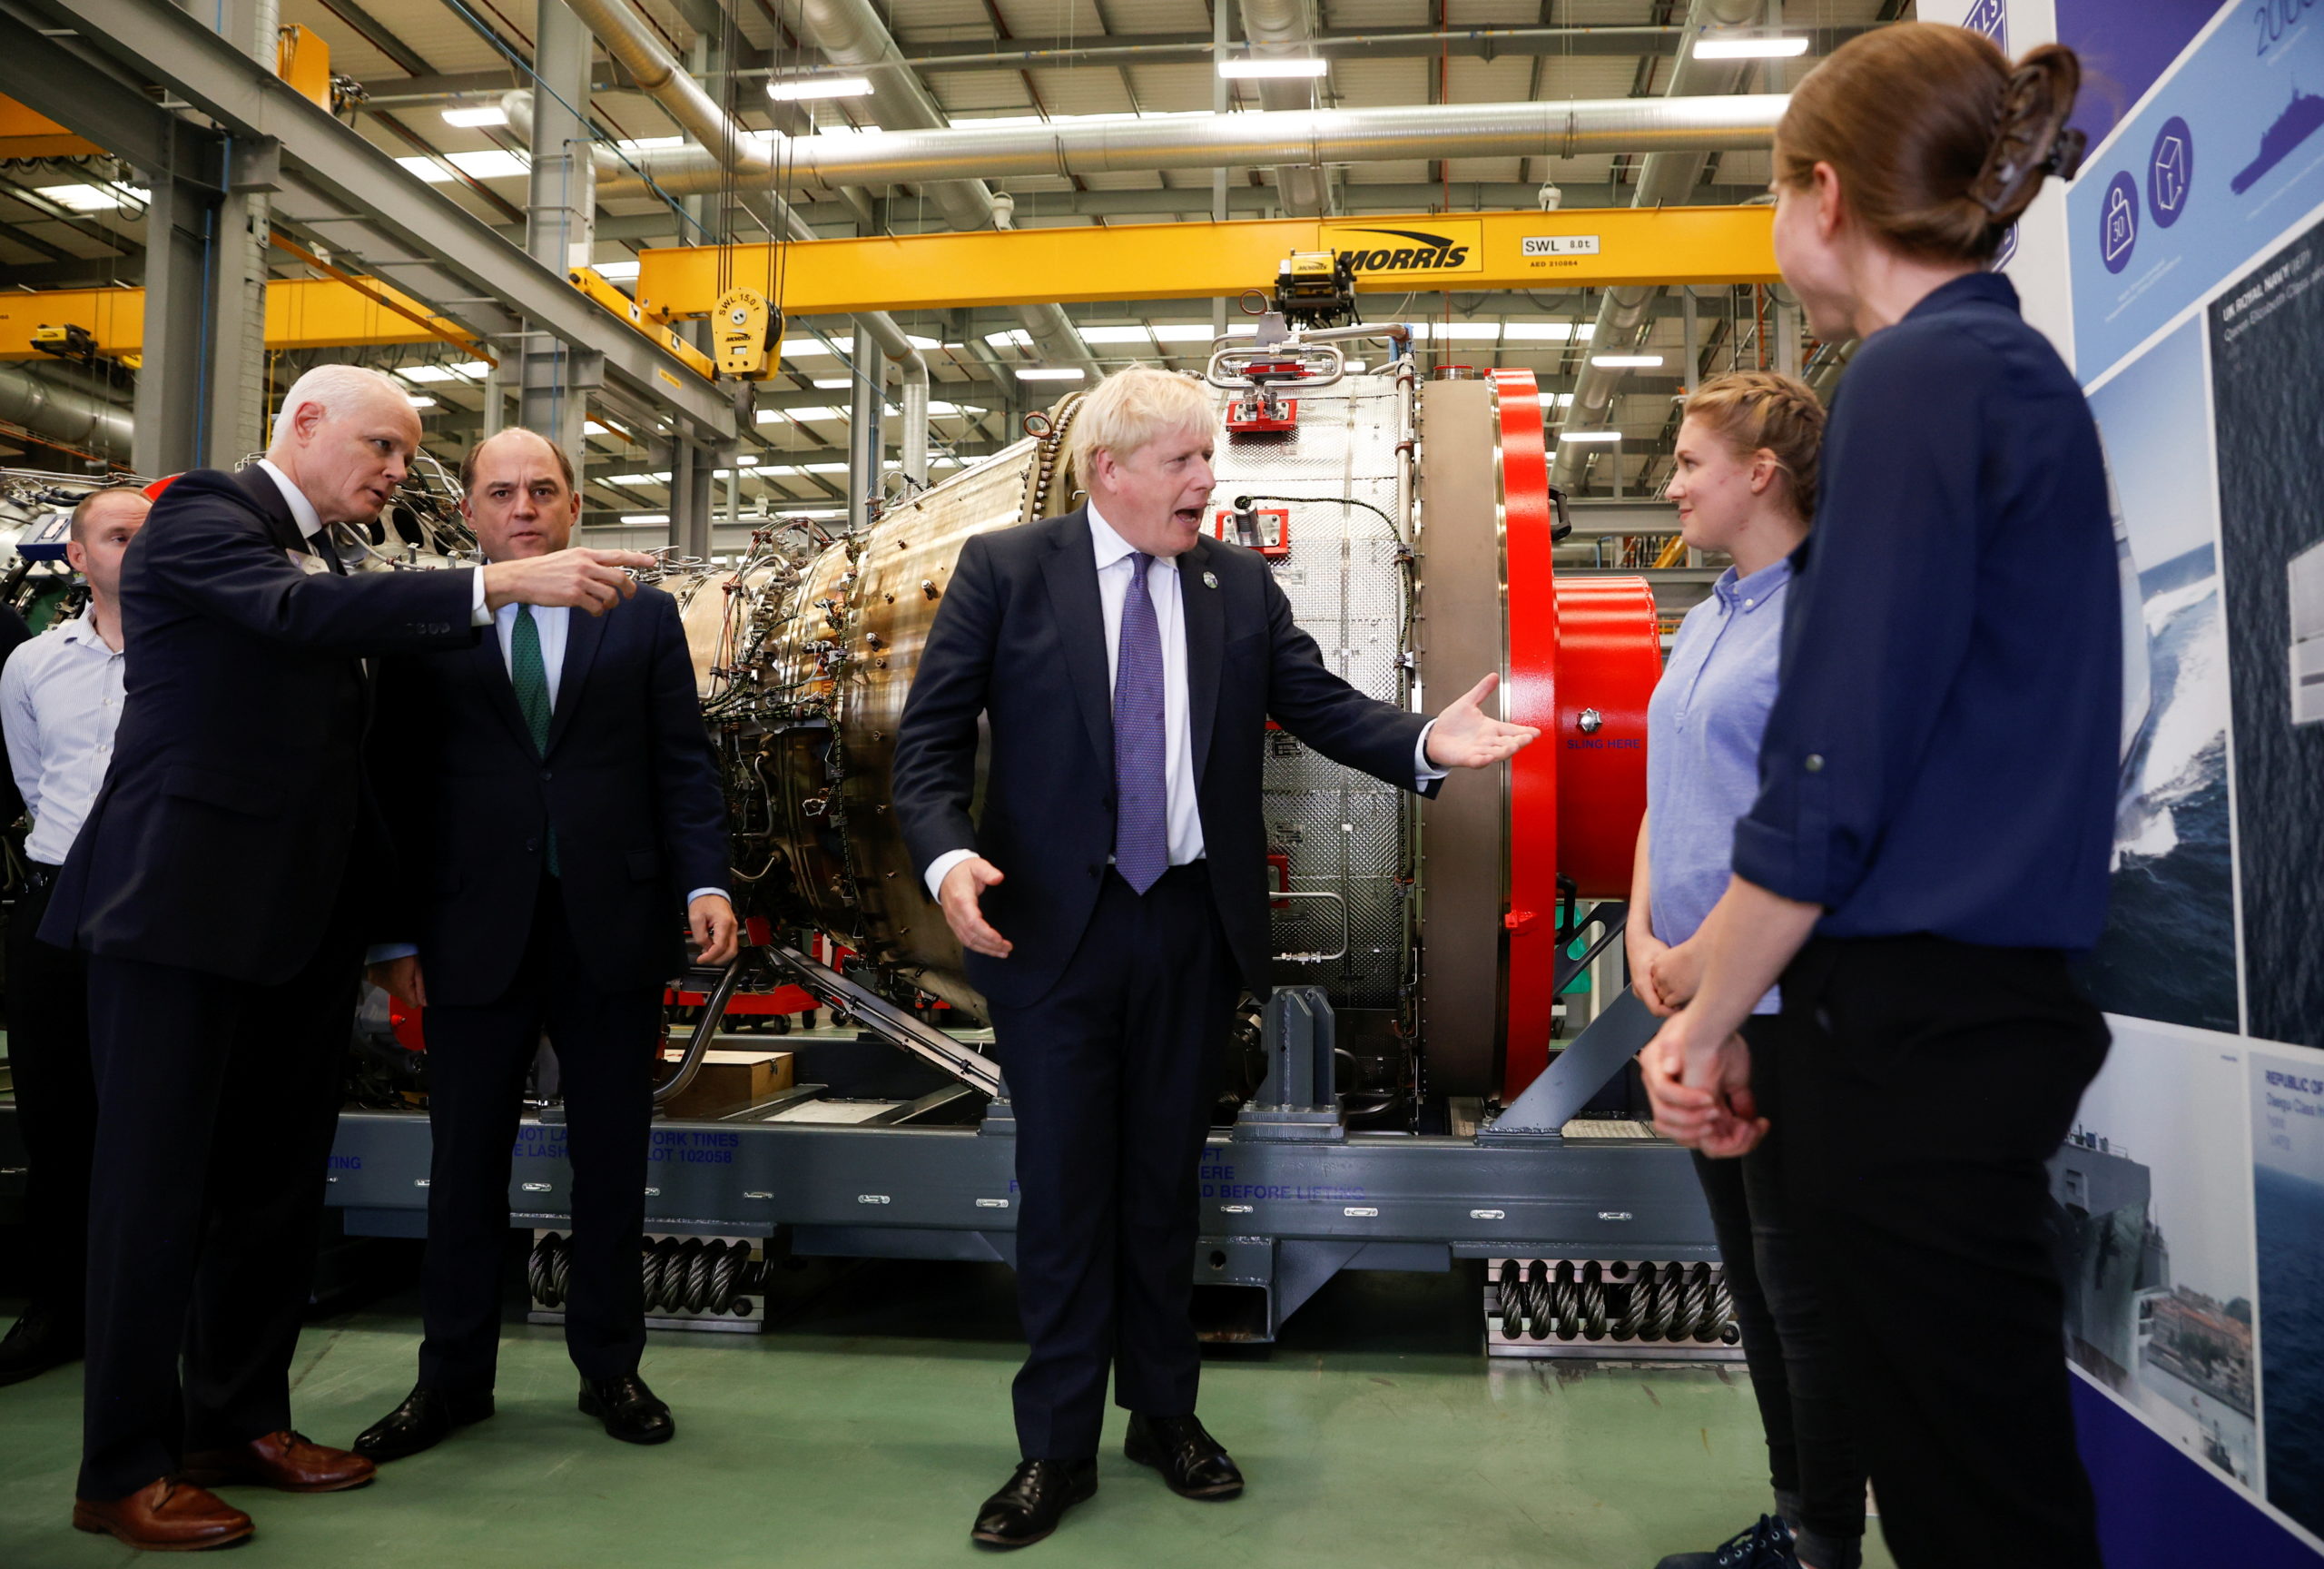 U.K. Prime Minister Boris Johnson visits a Rolls-Royce factory on Oct. 15 in Bristol, England. (John Sibley/WPA Pool/Getty Images)